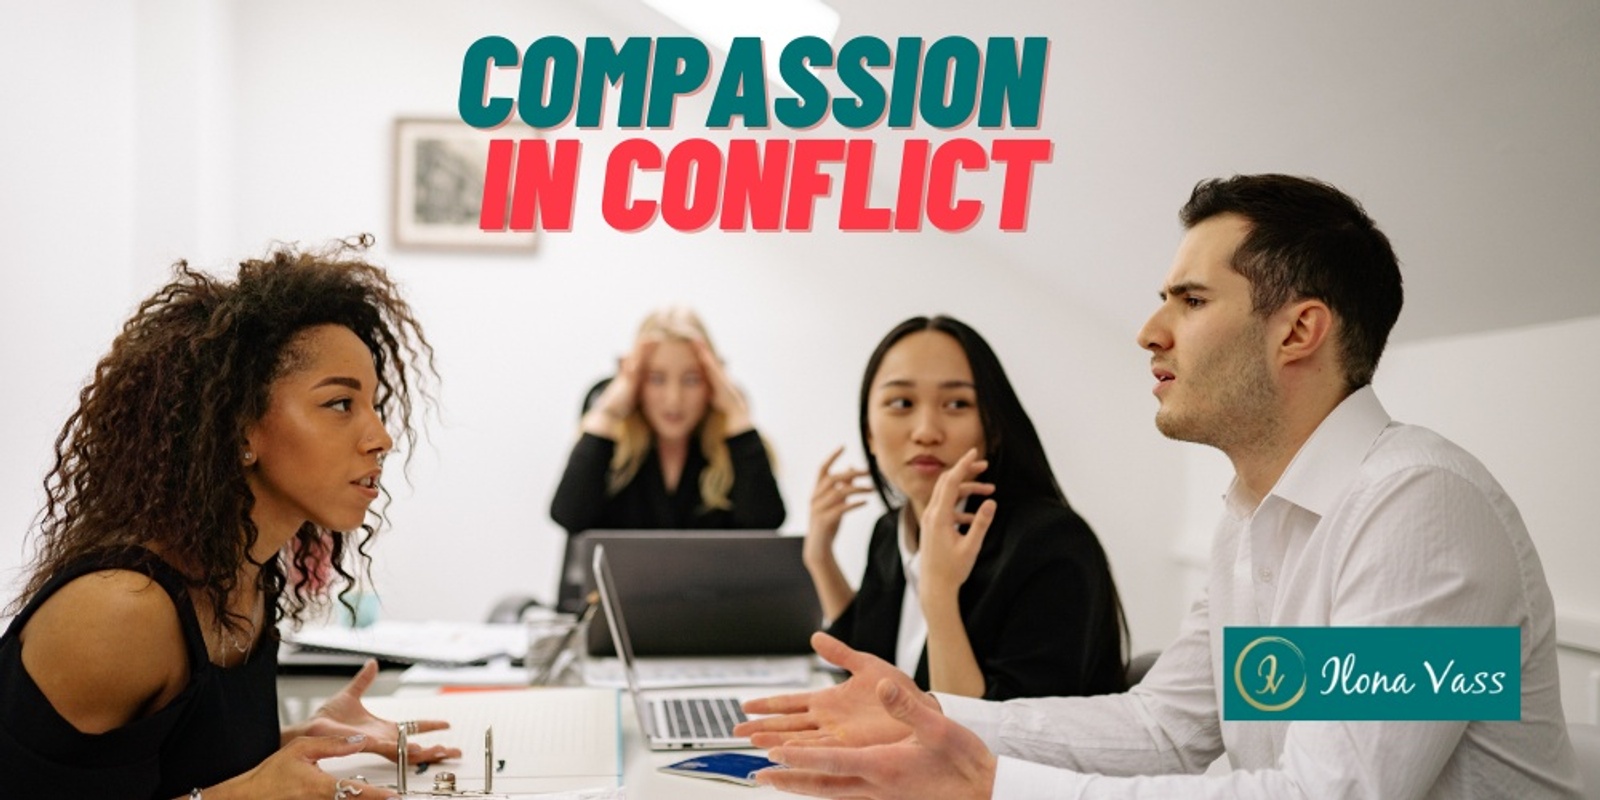 Compassion in Conflict Workshop - 4 hours over 2 evenings